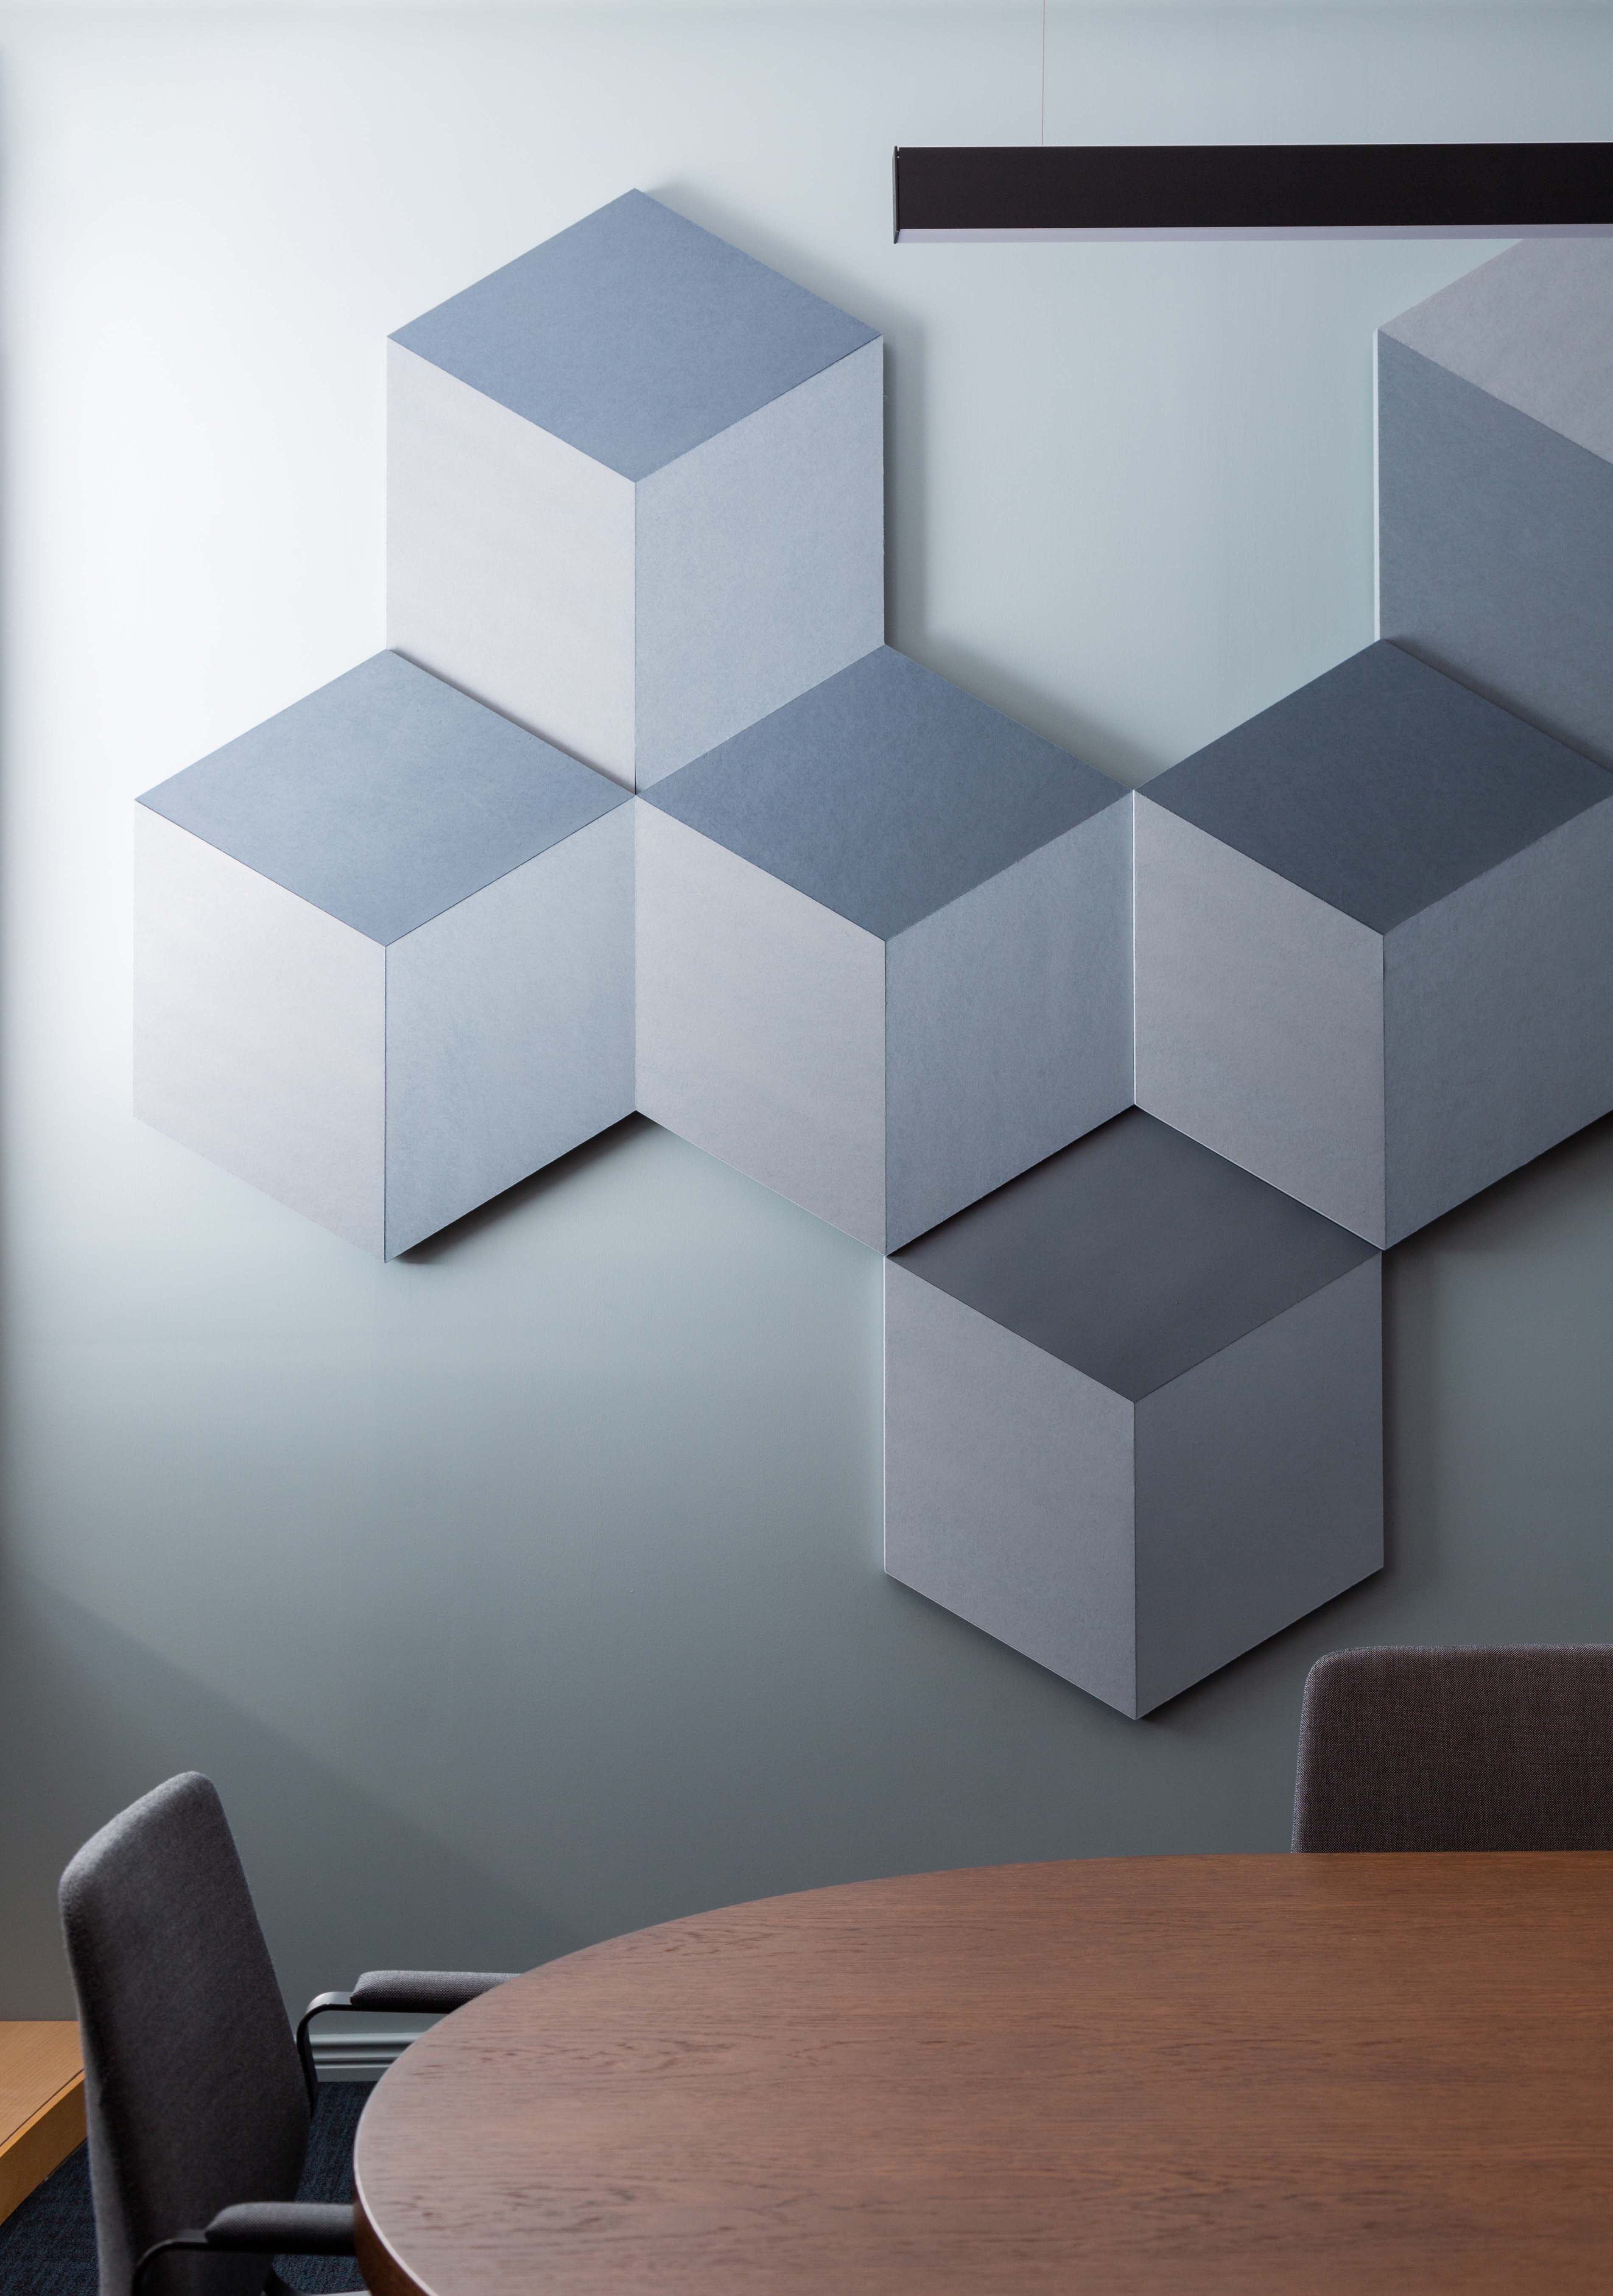 Air Dice office meeting room acoustic panels design